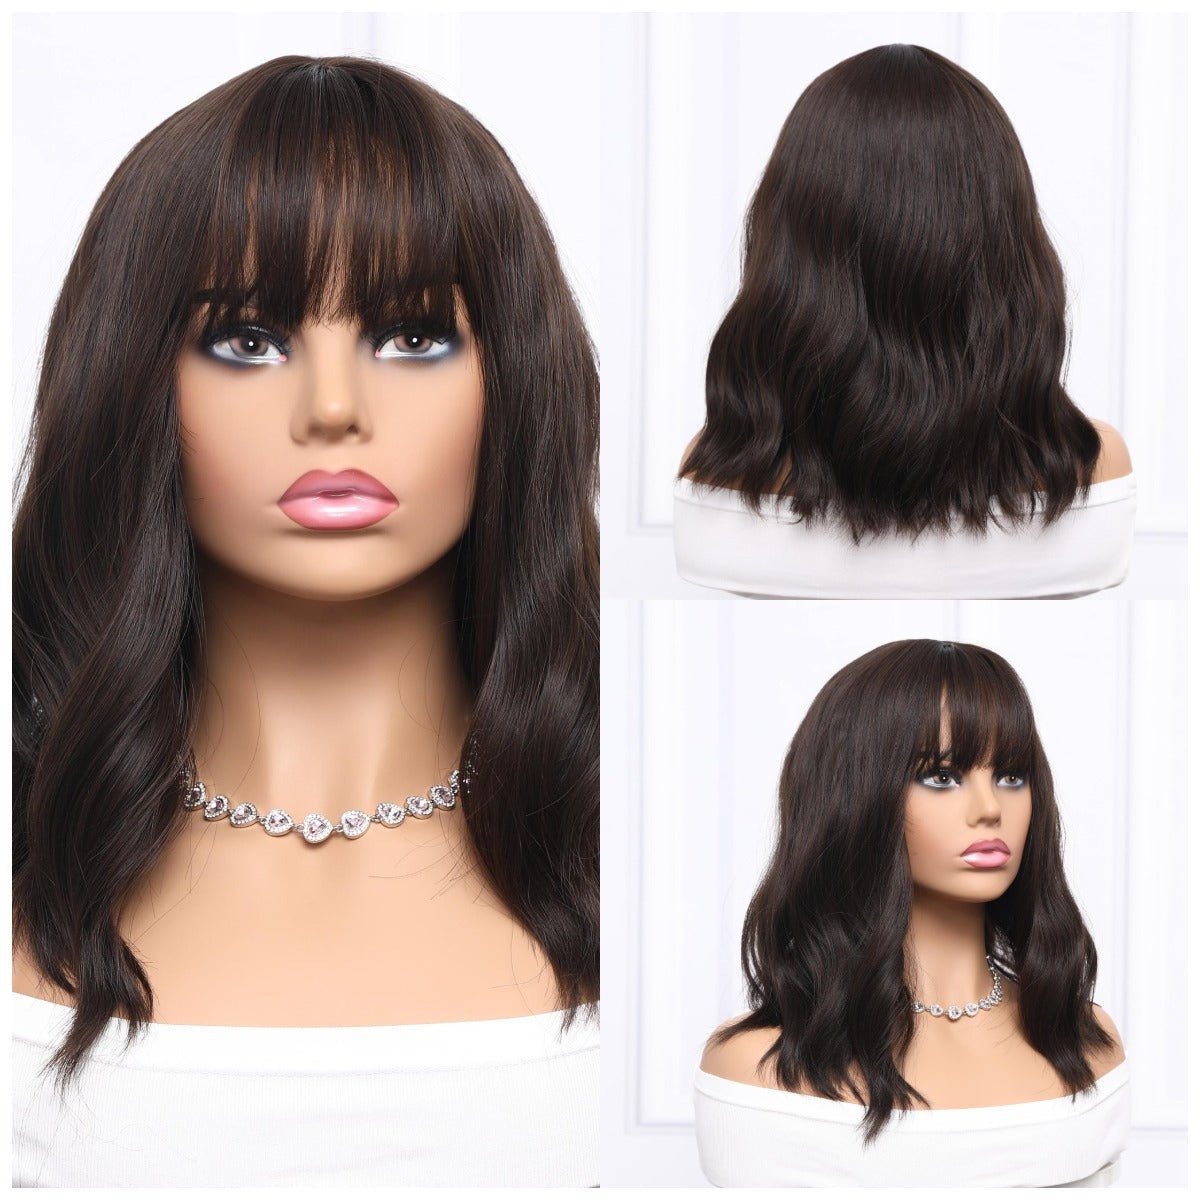 16-inch | Black Loose Wave with Hair Bangs | SM210-4 - TapLike